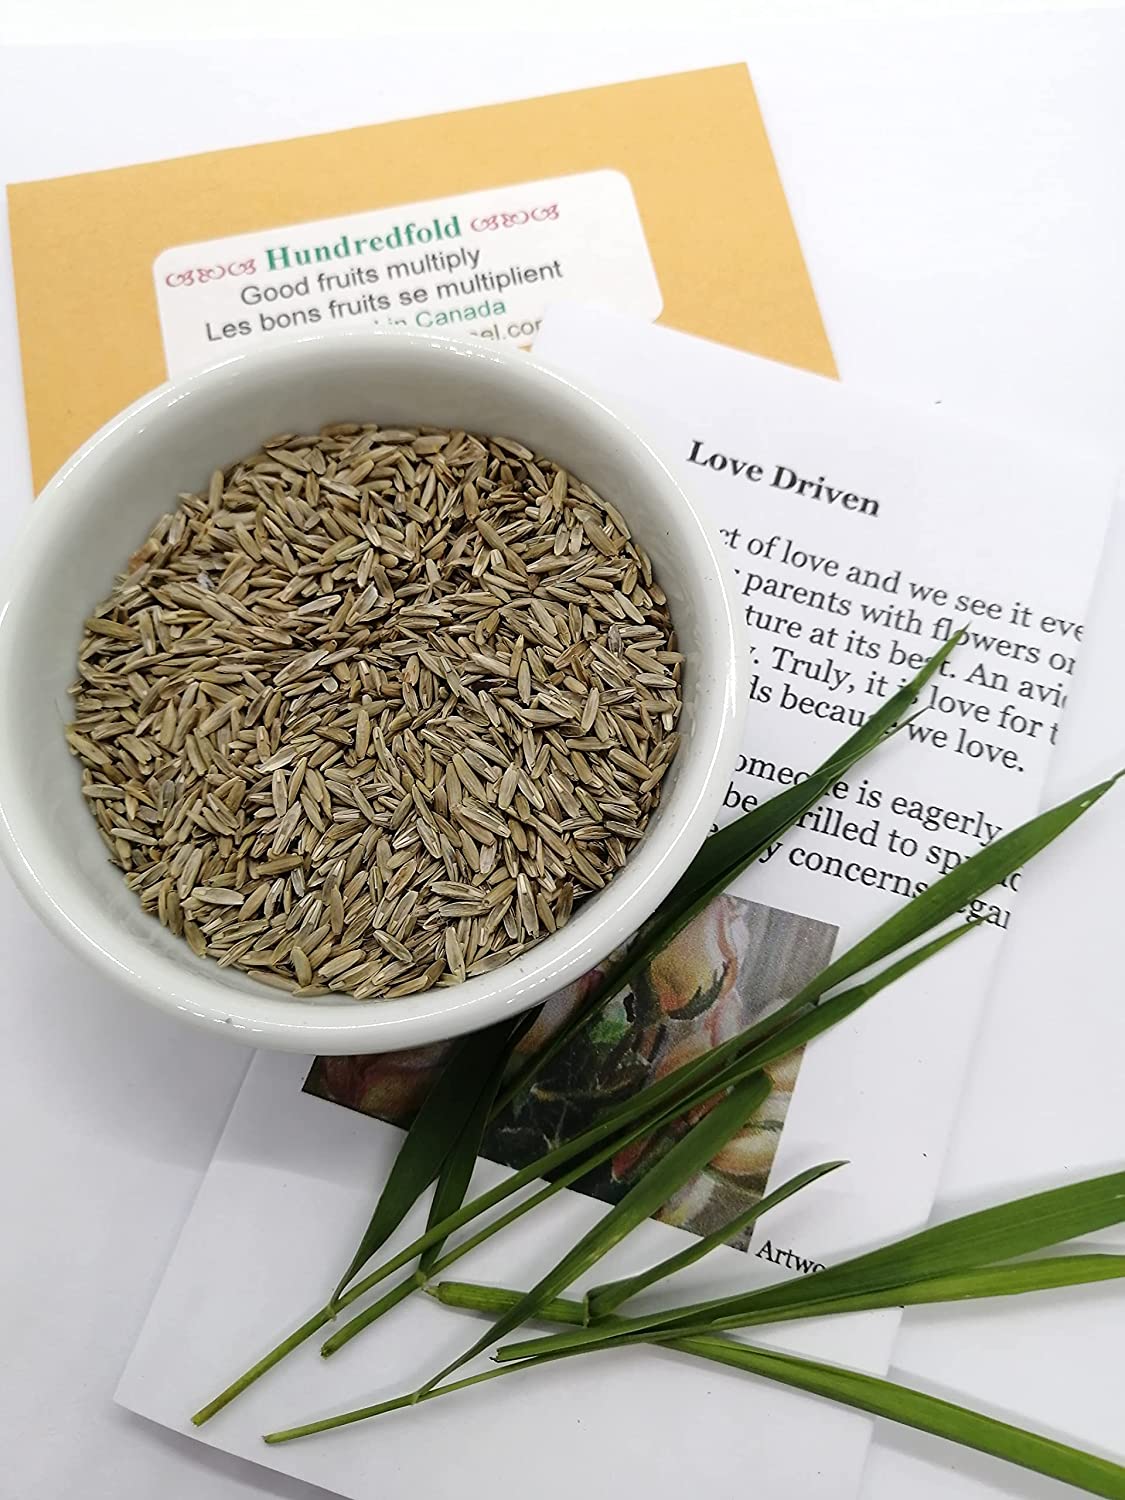 Hundredfold 25 Grams Organic Annual Ryegrass Seeds - Festuca perennis Non-GMO, Low-Growing Cover Crop, Soil Enrichment and Weed Suppression, Packed and Shipped in Canada